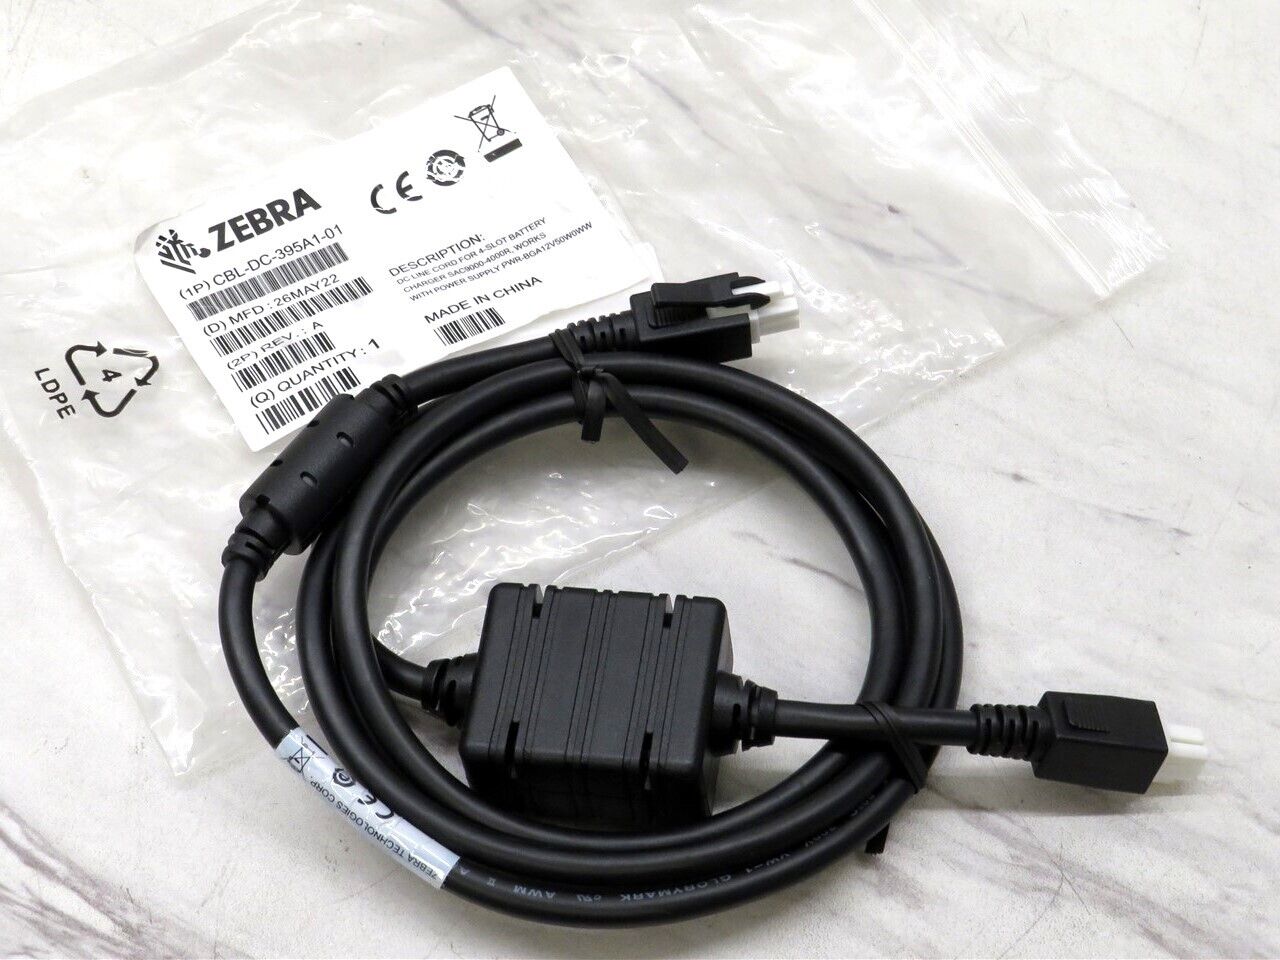 NEW Genuine Zebra 4-Pin to 4-Pin DC Power Cable CBL-DC-395A1-01